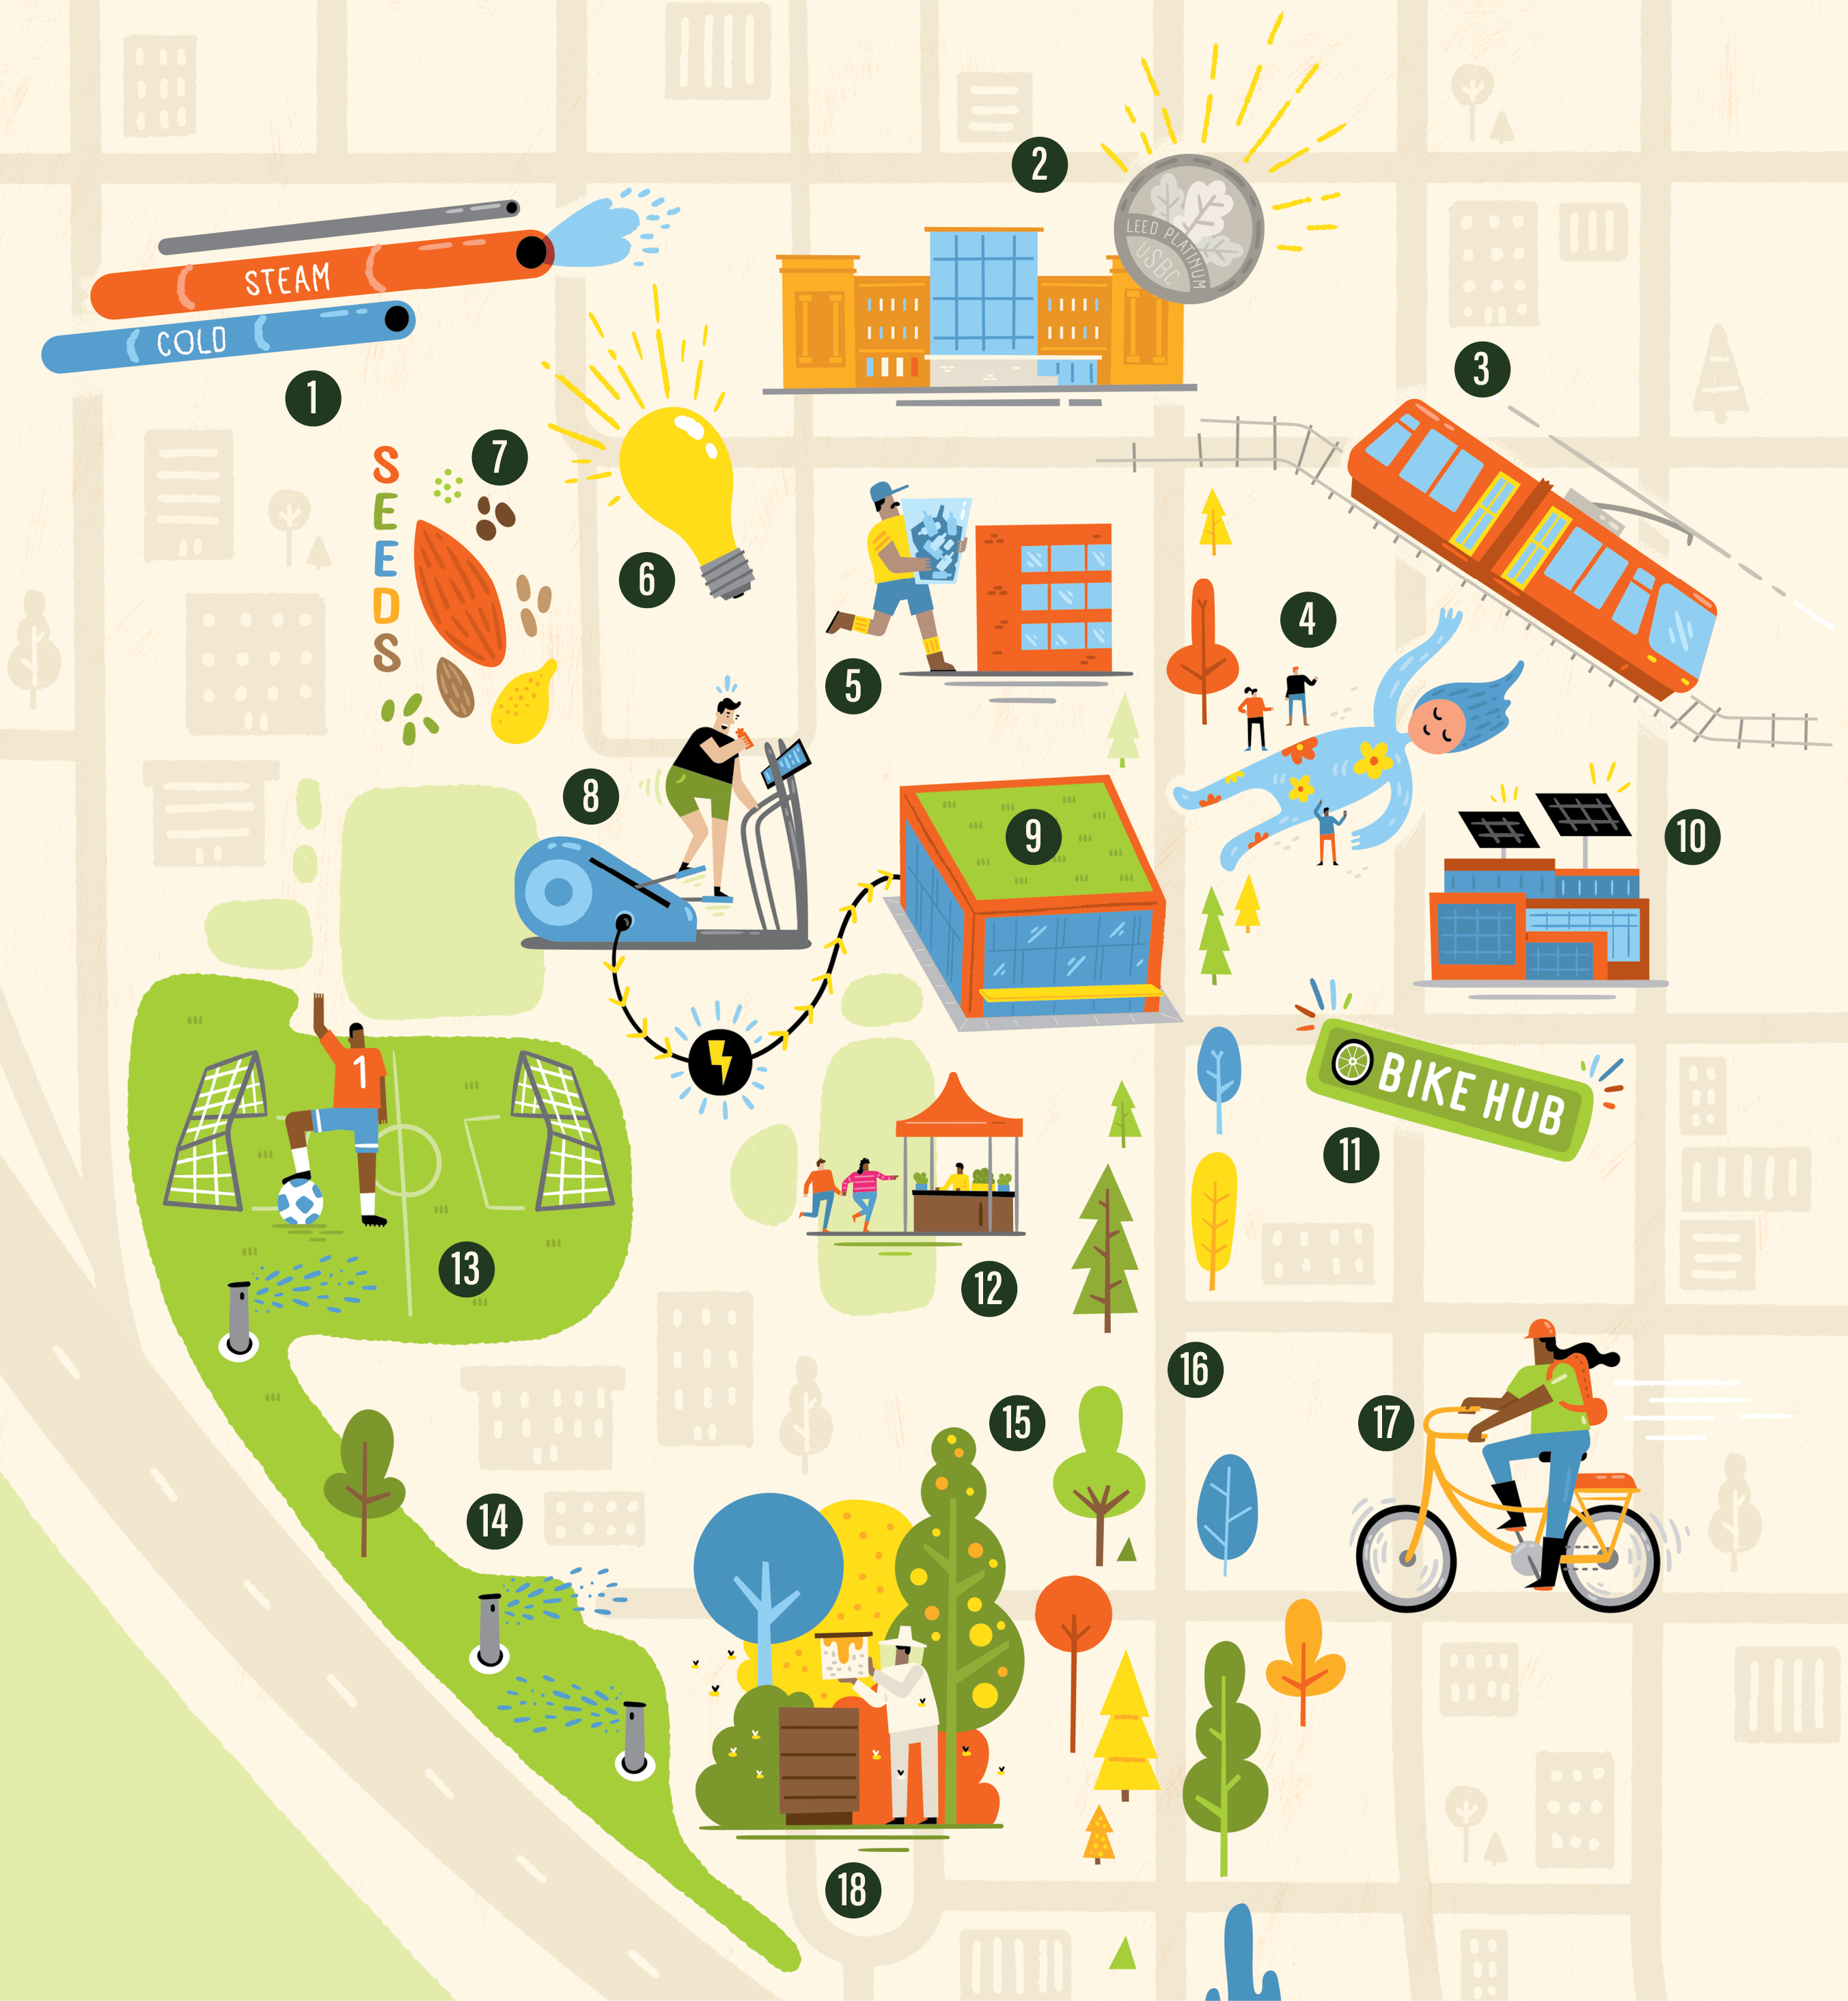 Illustration of people performing activities on a campus map with number callouts